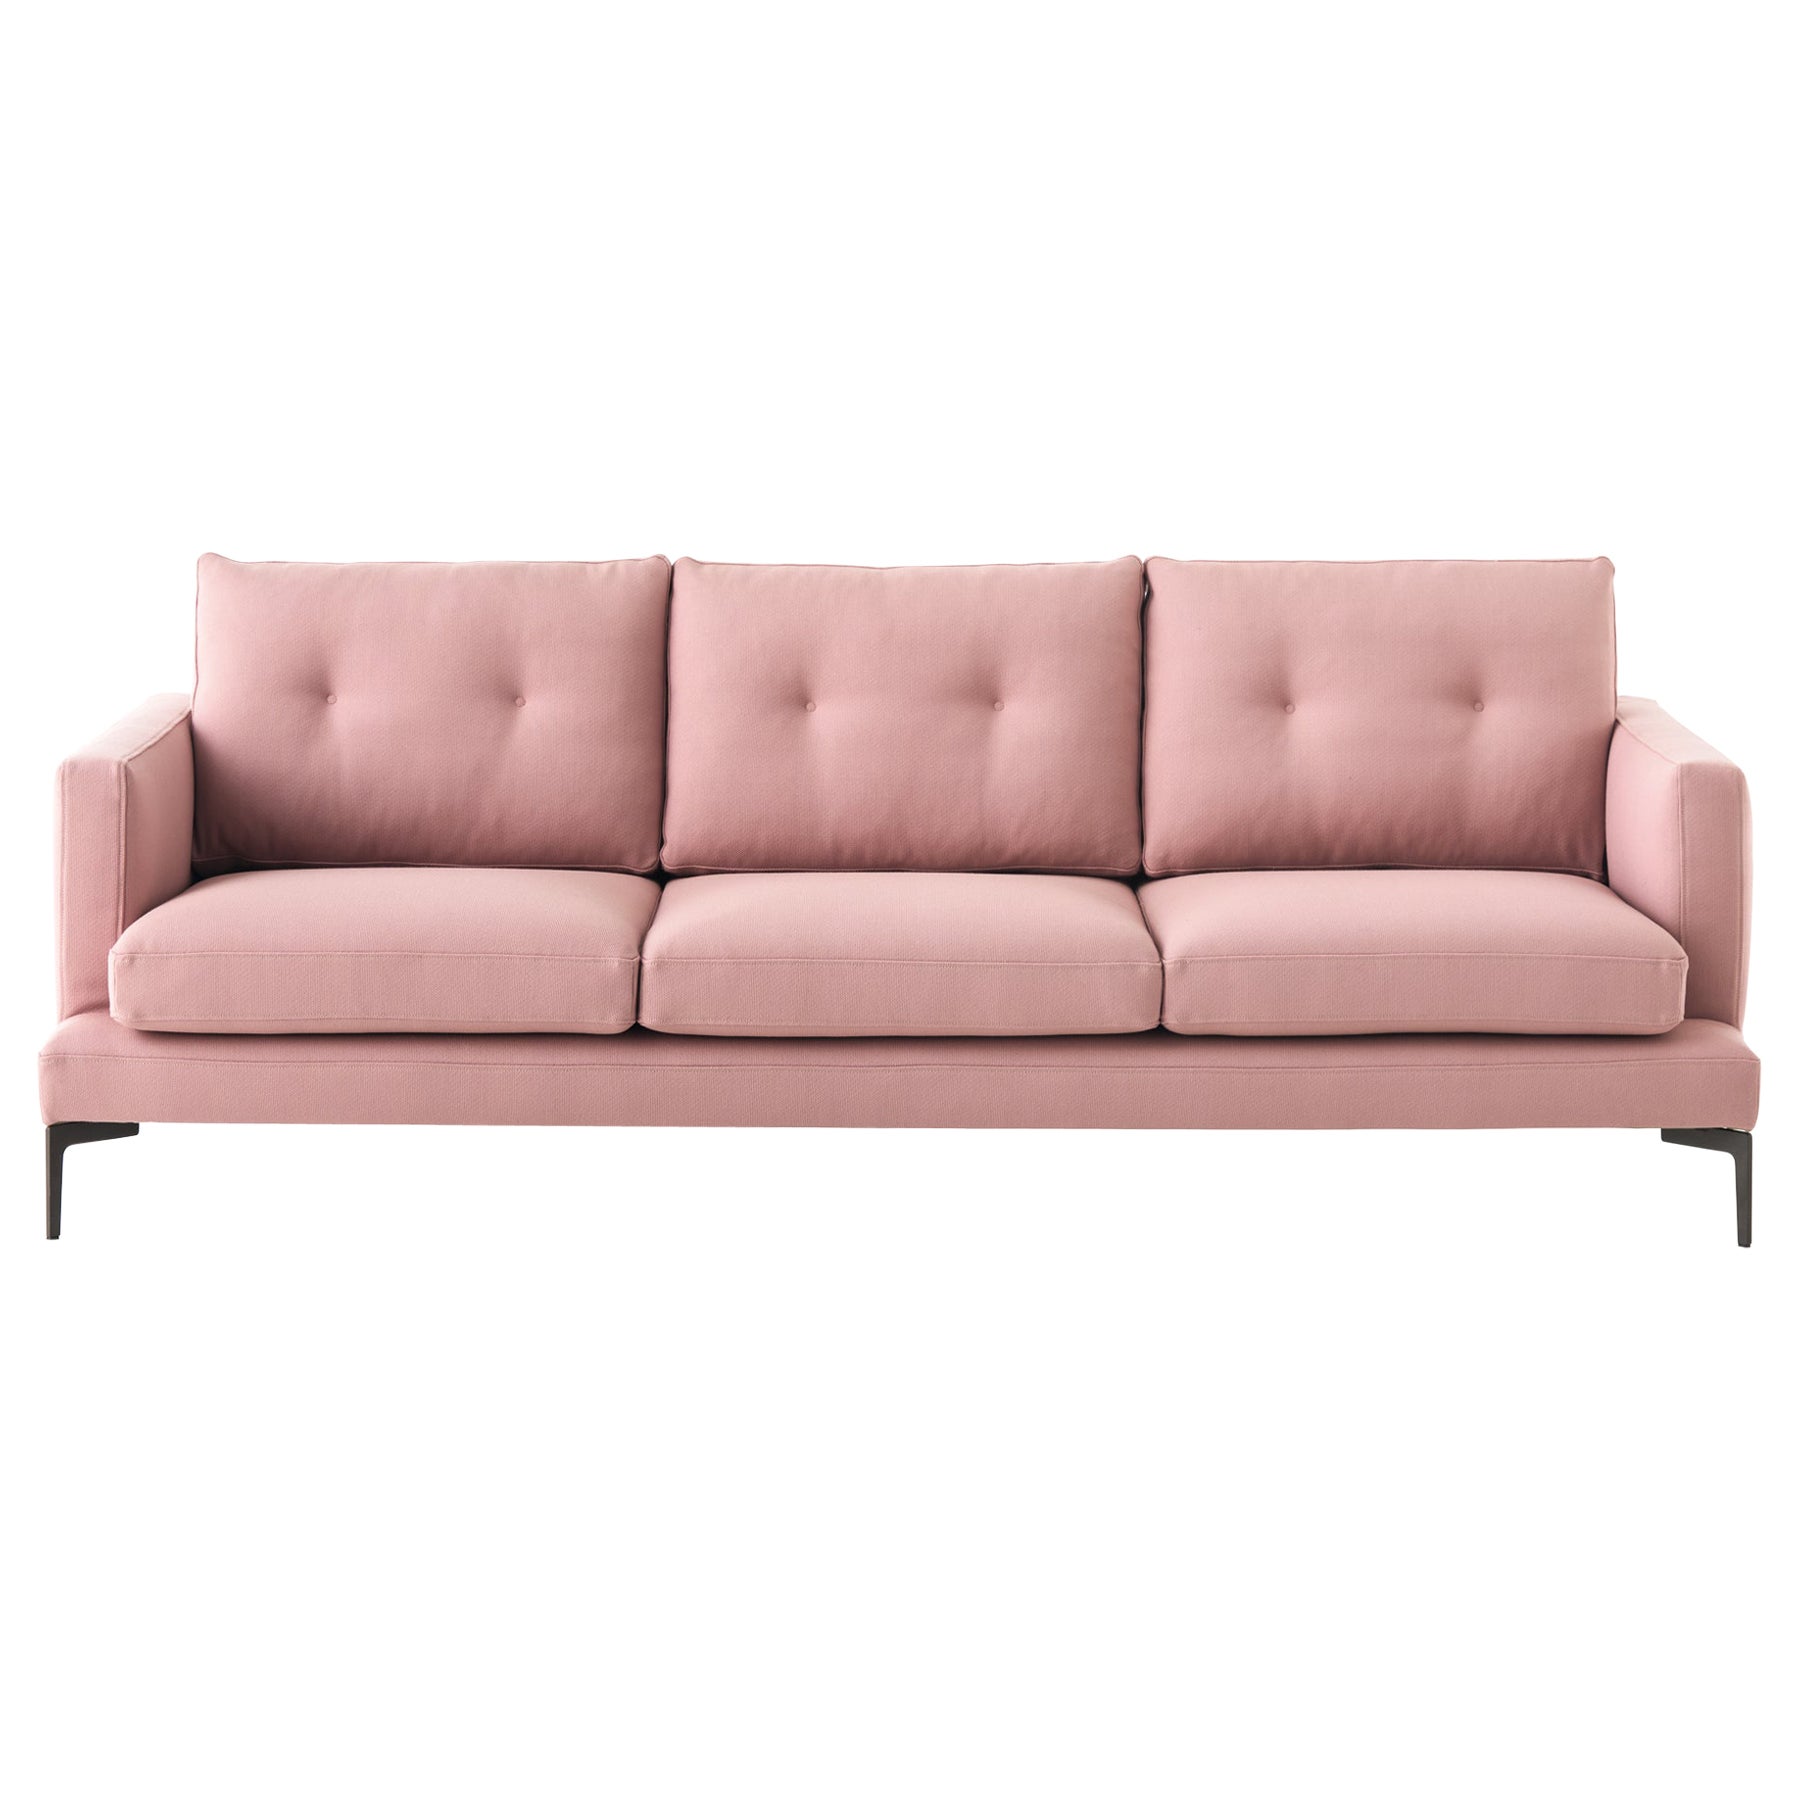 Essentiel 3-Seat 220 Sofa in Smile Pink Upholstery & Grey Legs by Sergio Bicego For Sale